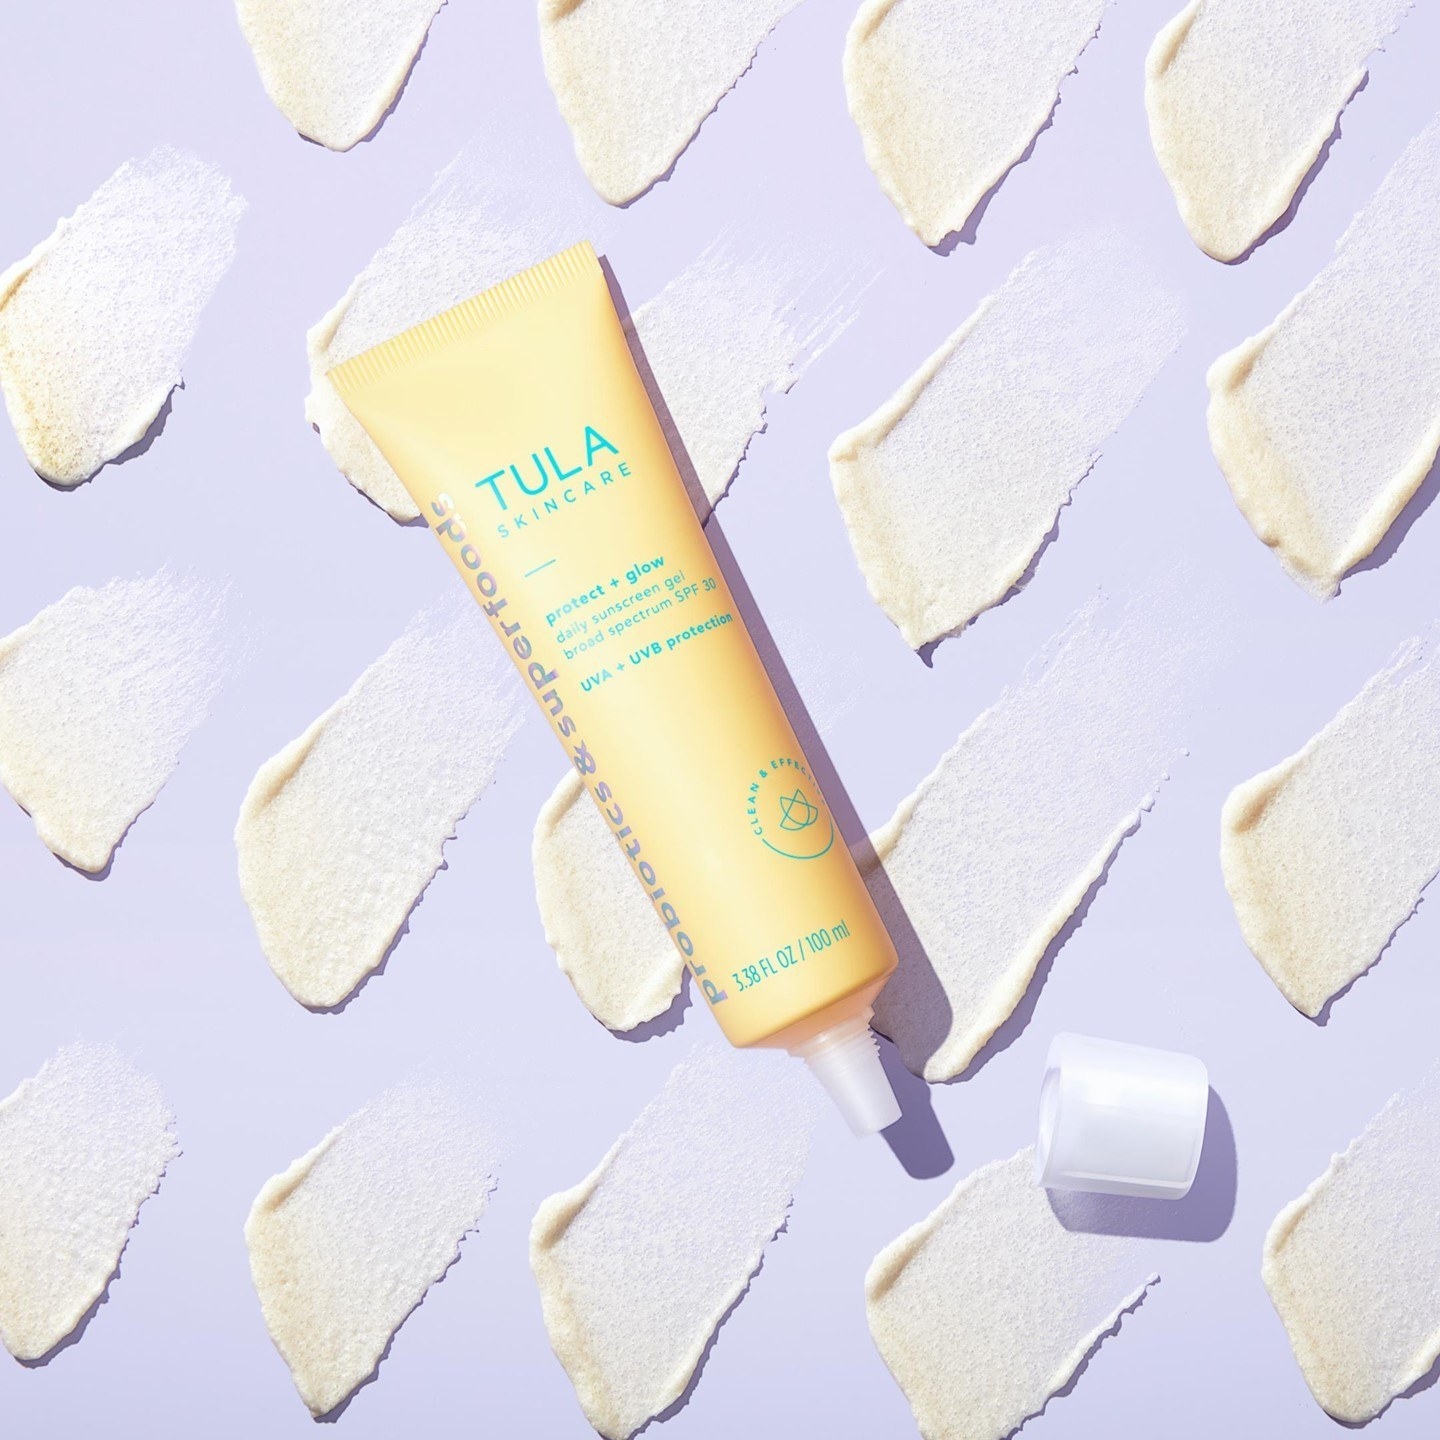 photo of the TULA sunscreen on purple background with product swatches